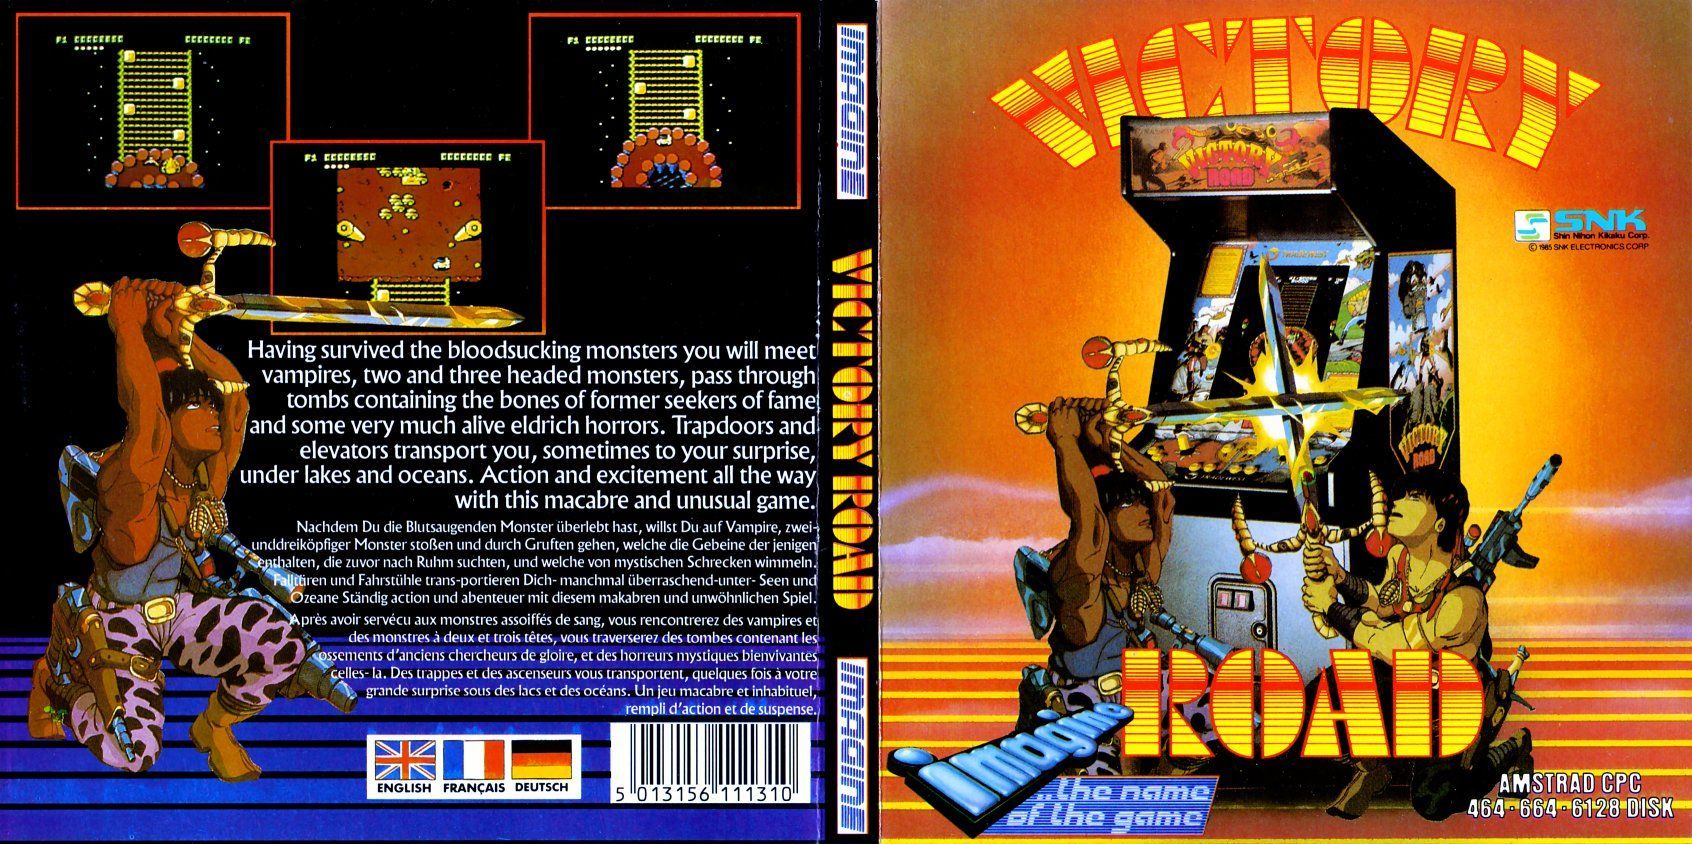 cover of the Amstrad CPC game victory_road by Mig